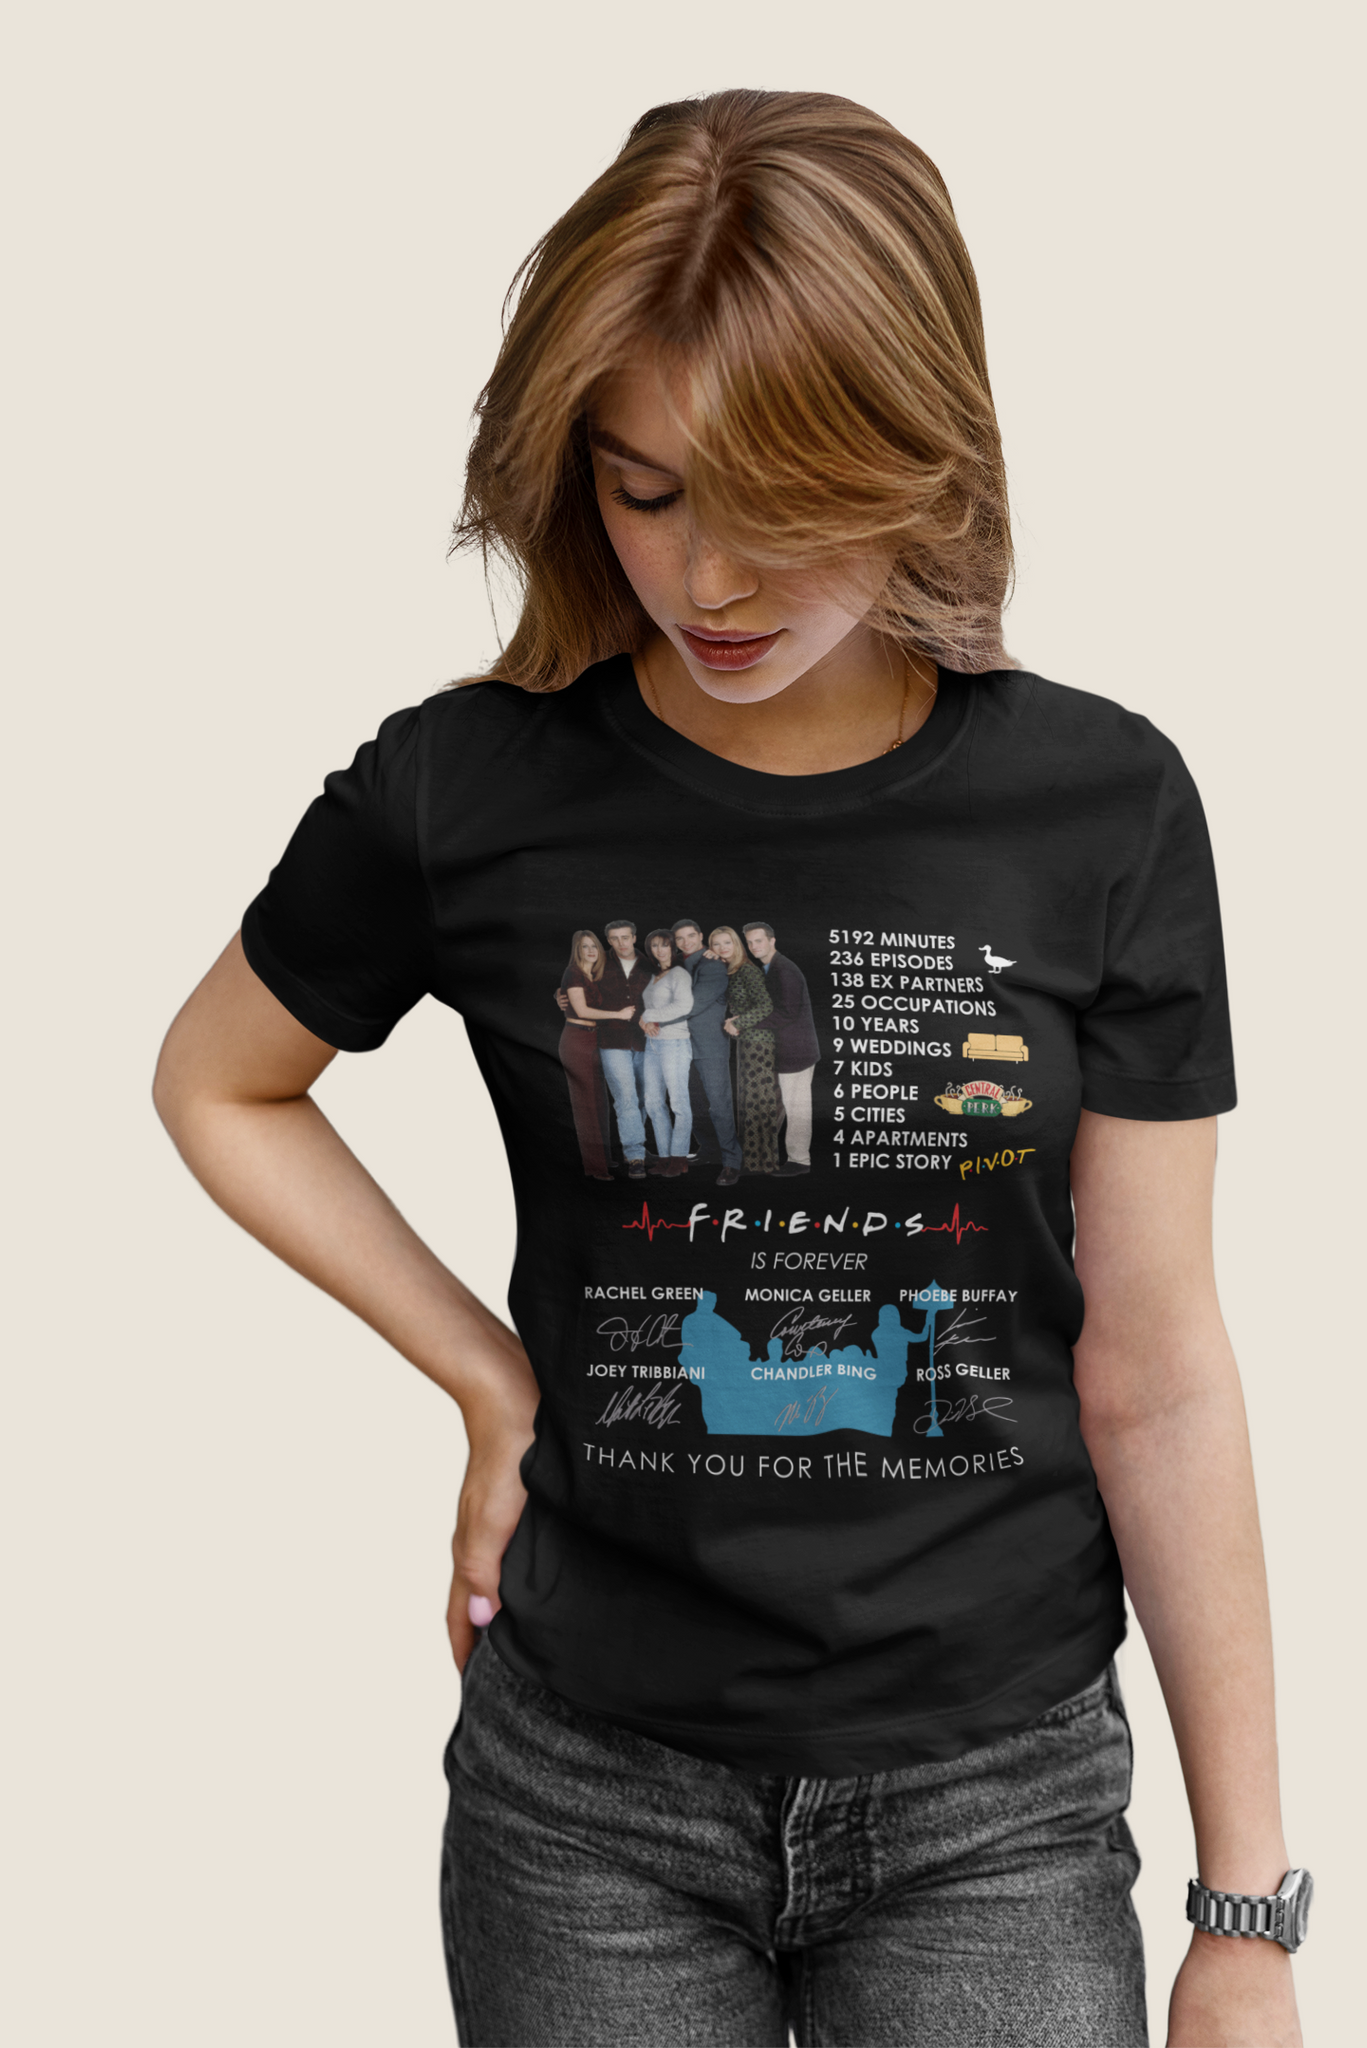 Friends TV Show T Shirt, Friends Characters Shirt, Anniversary Friends Is Forever Tshirt